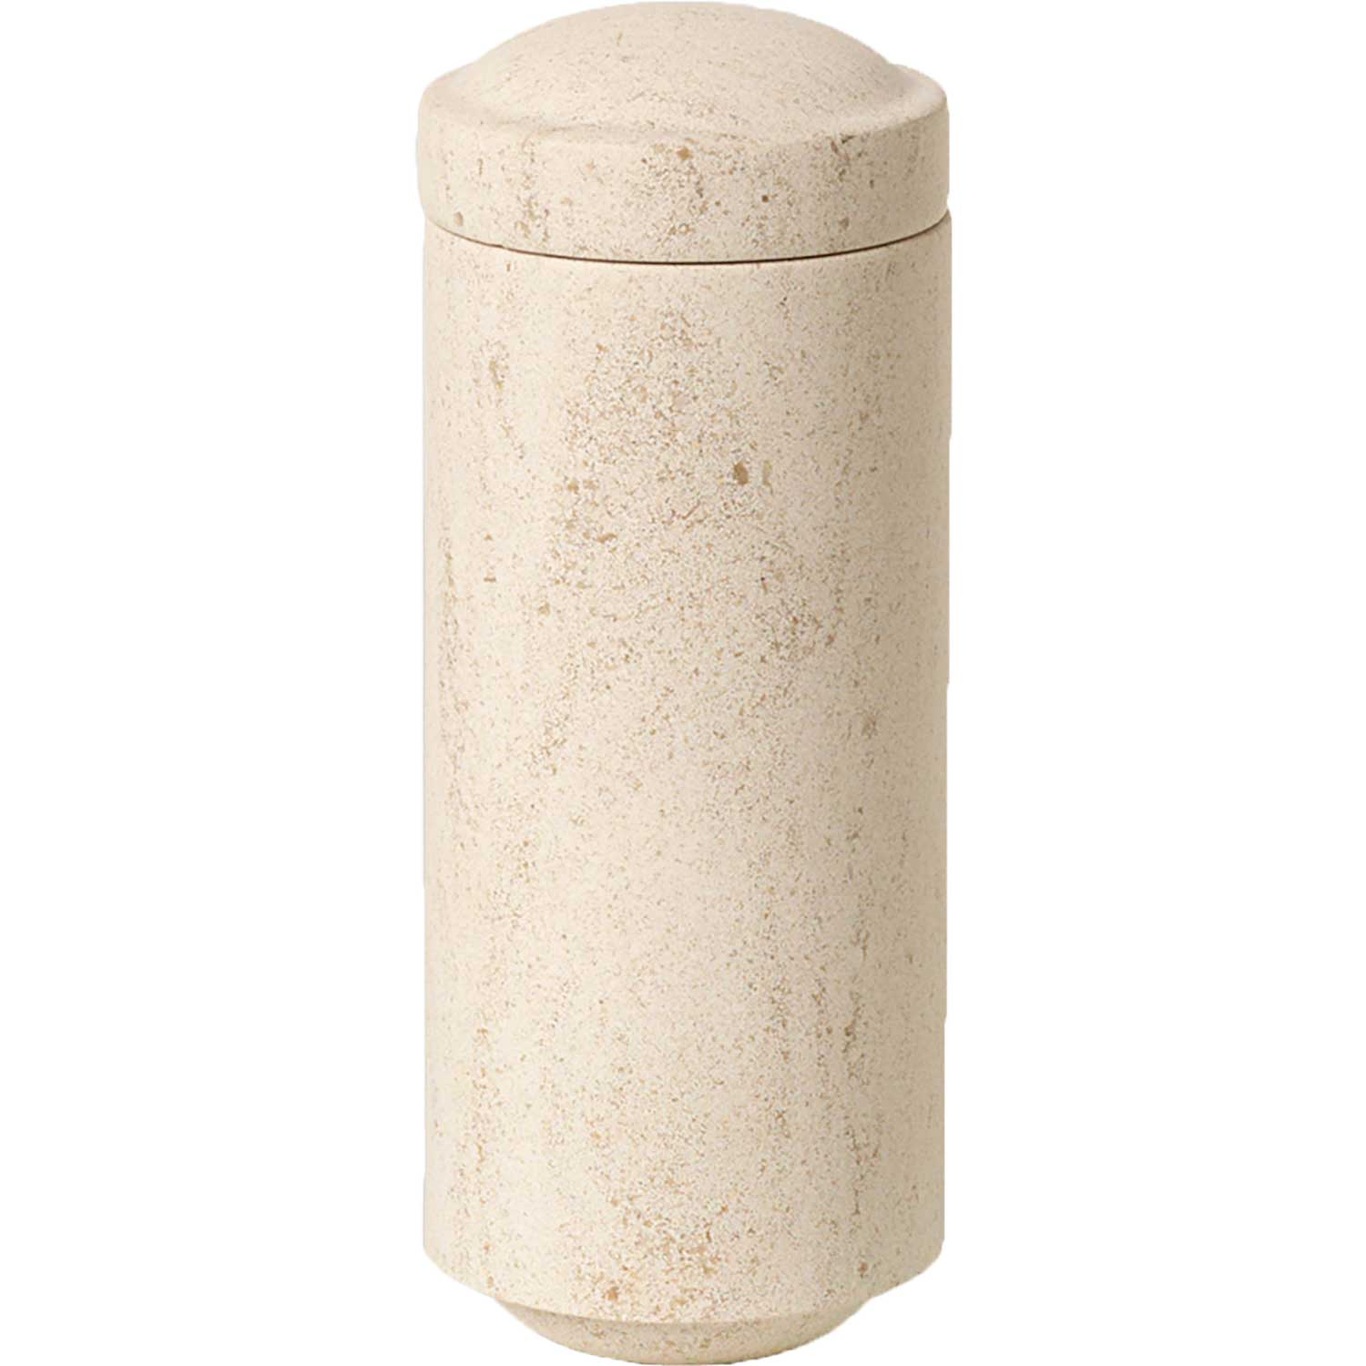 Gallery Objects Pot 18 cm, Lime Stone